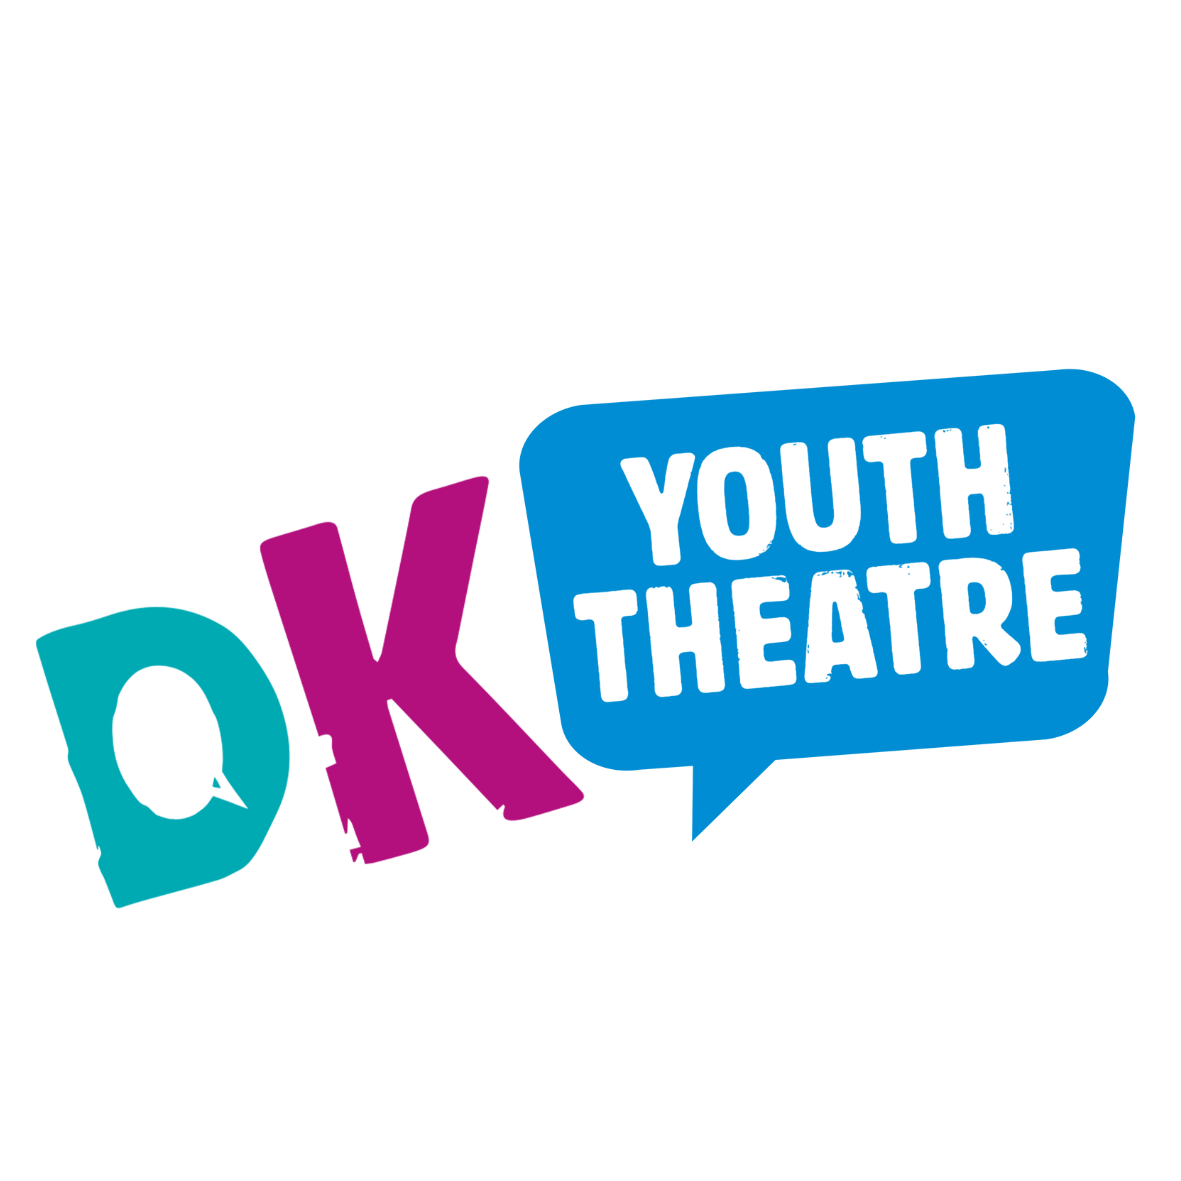 Drama Kids Youth Theatre logo for classes near me. For 12-18 year olds.